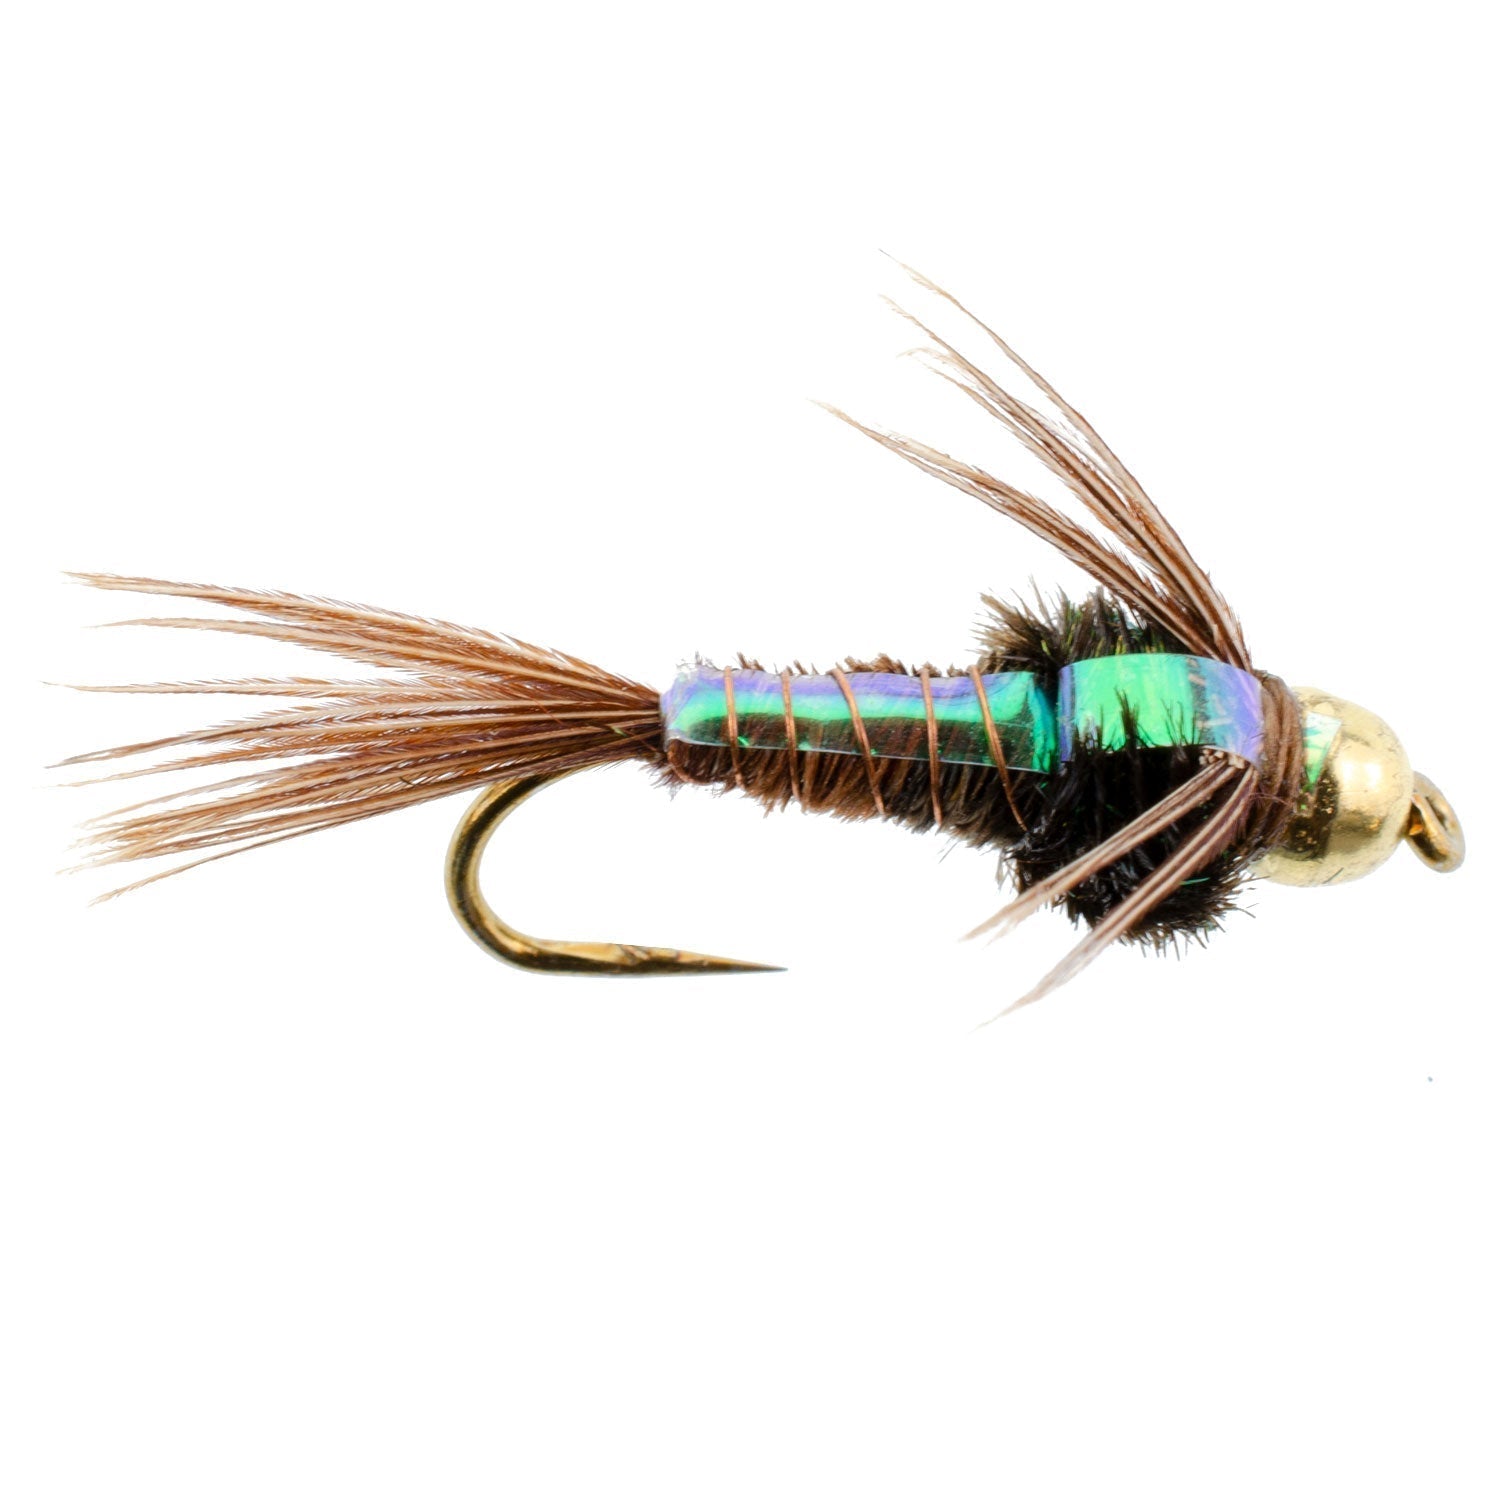 Barbless Bead Head Flashback Pheasant Tail Nymph Fly 6 Flies Hook Size 18